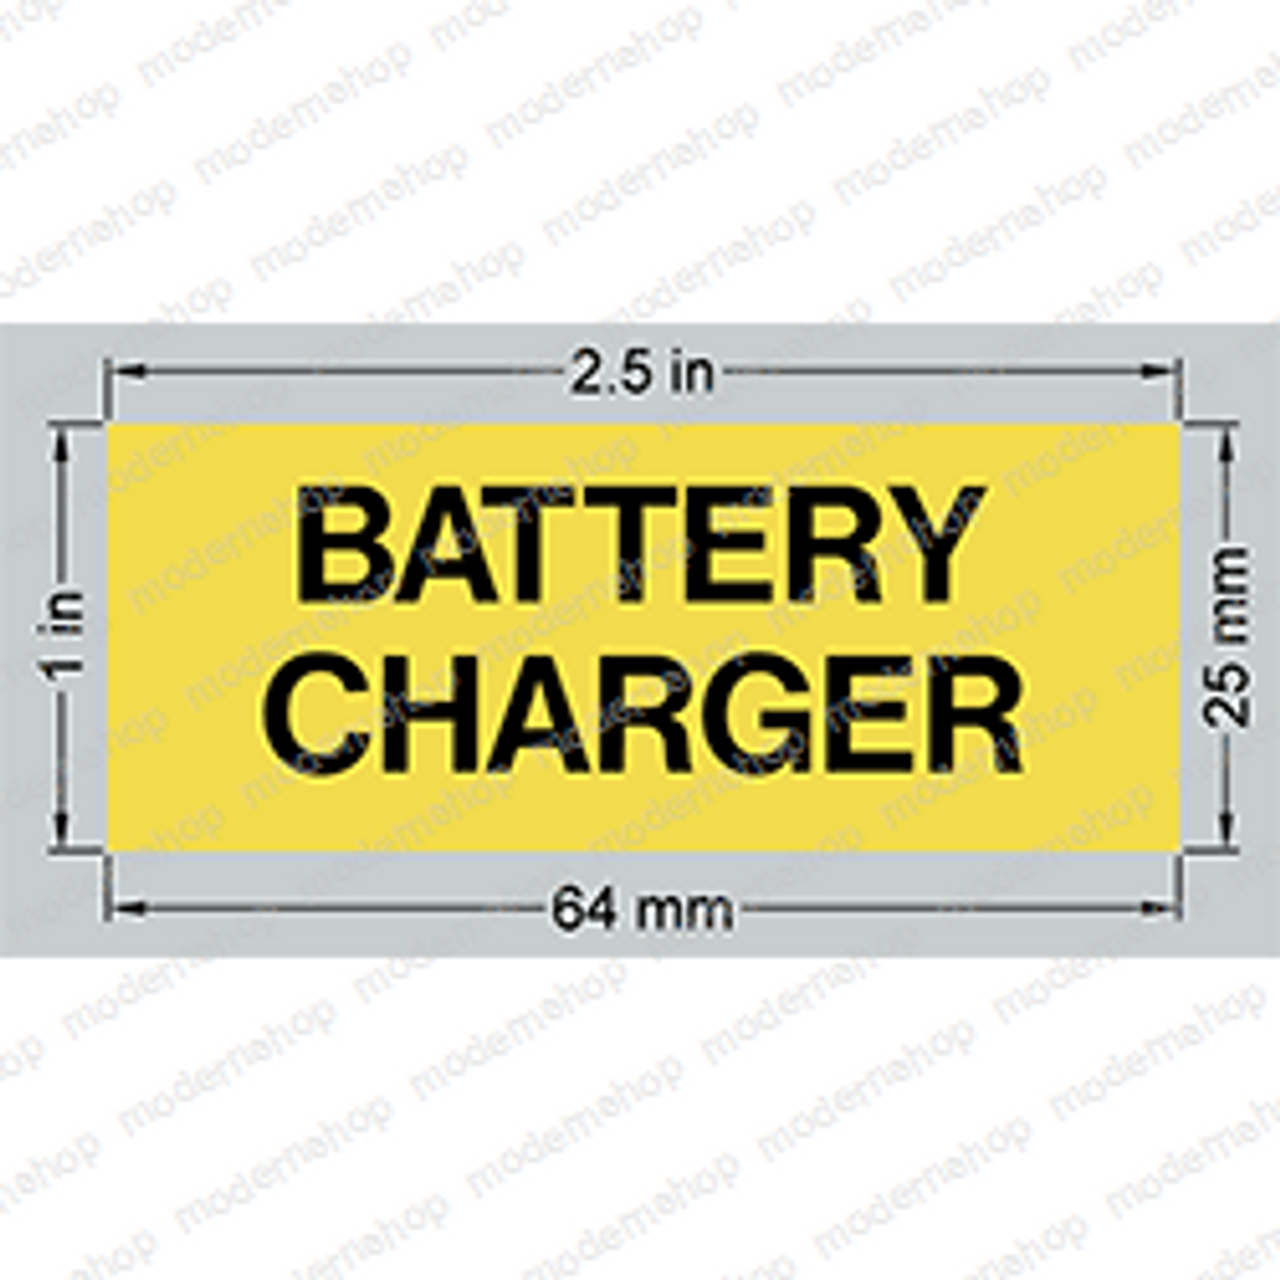 066522-000: Upright DECAL - BATTERY CHARGER